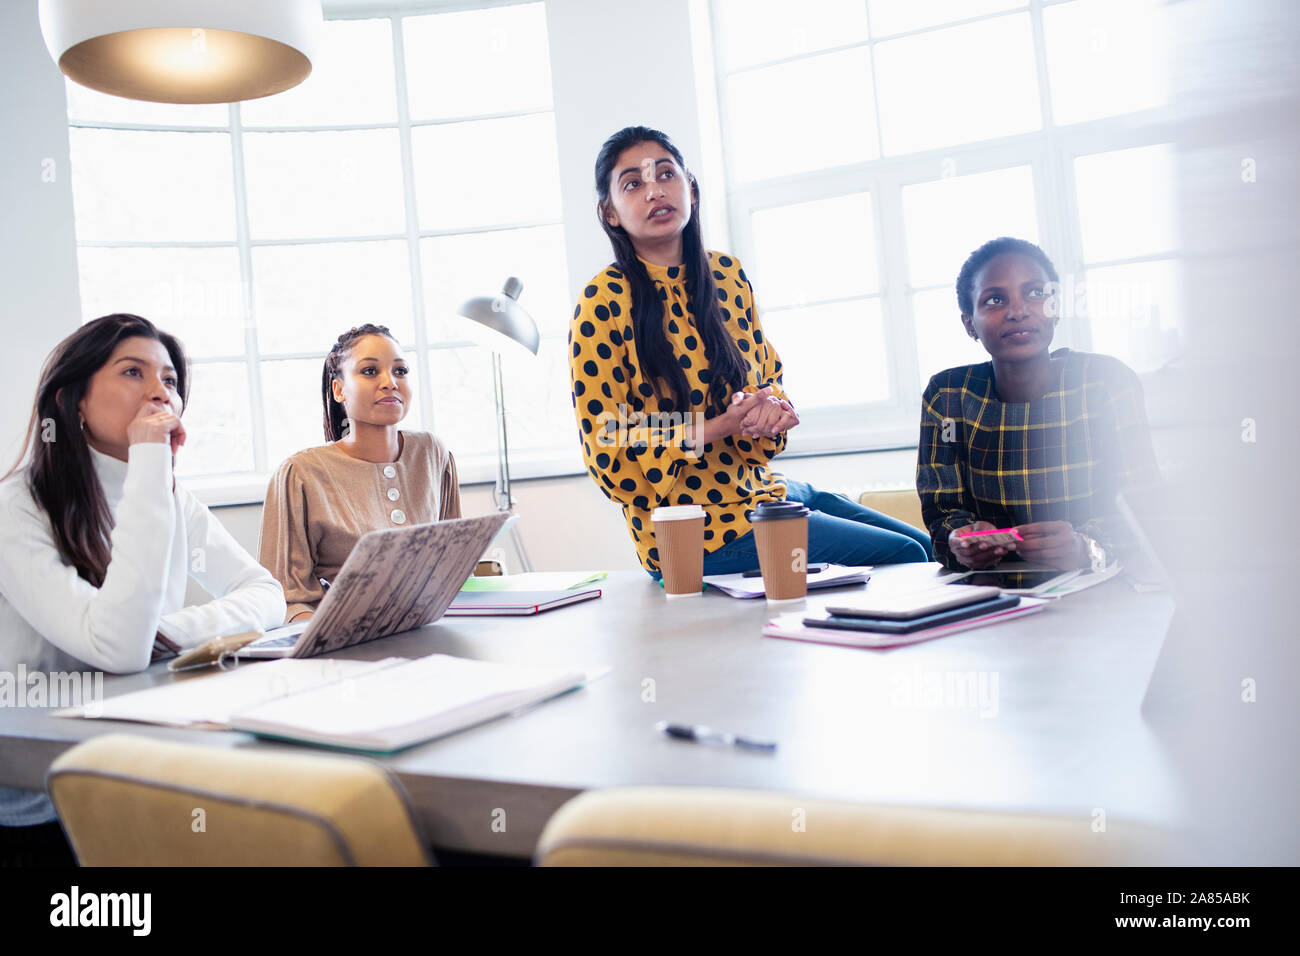 Attentive businesswomen listening in conference room meeting Stock Photo